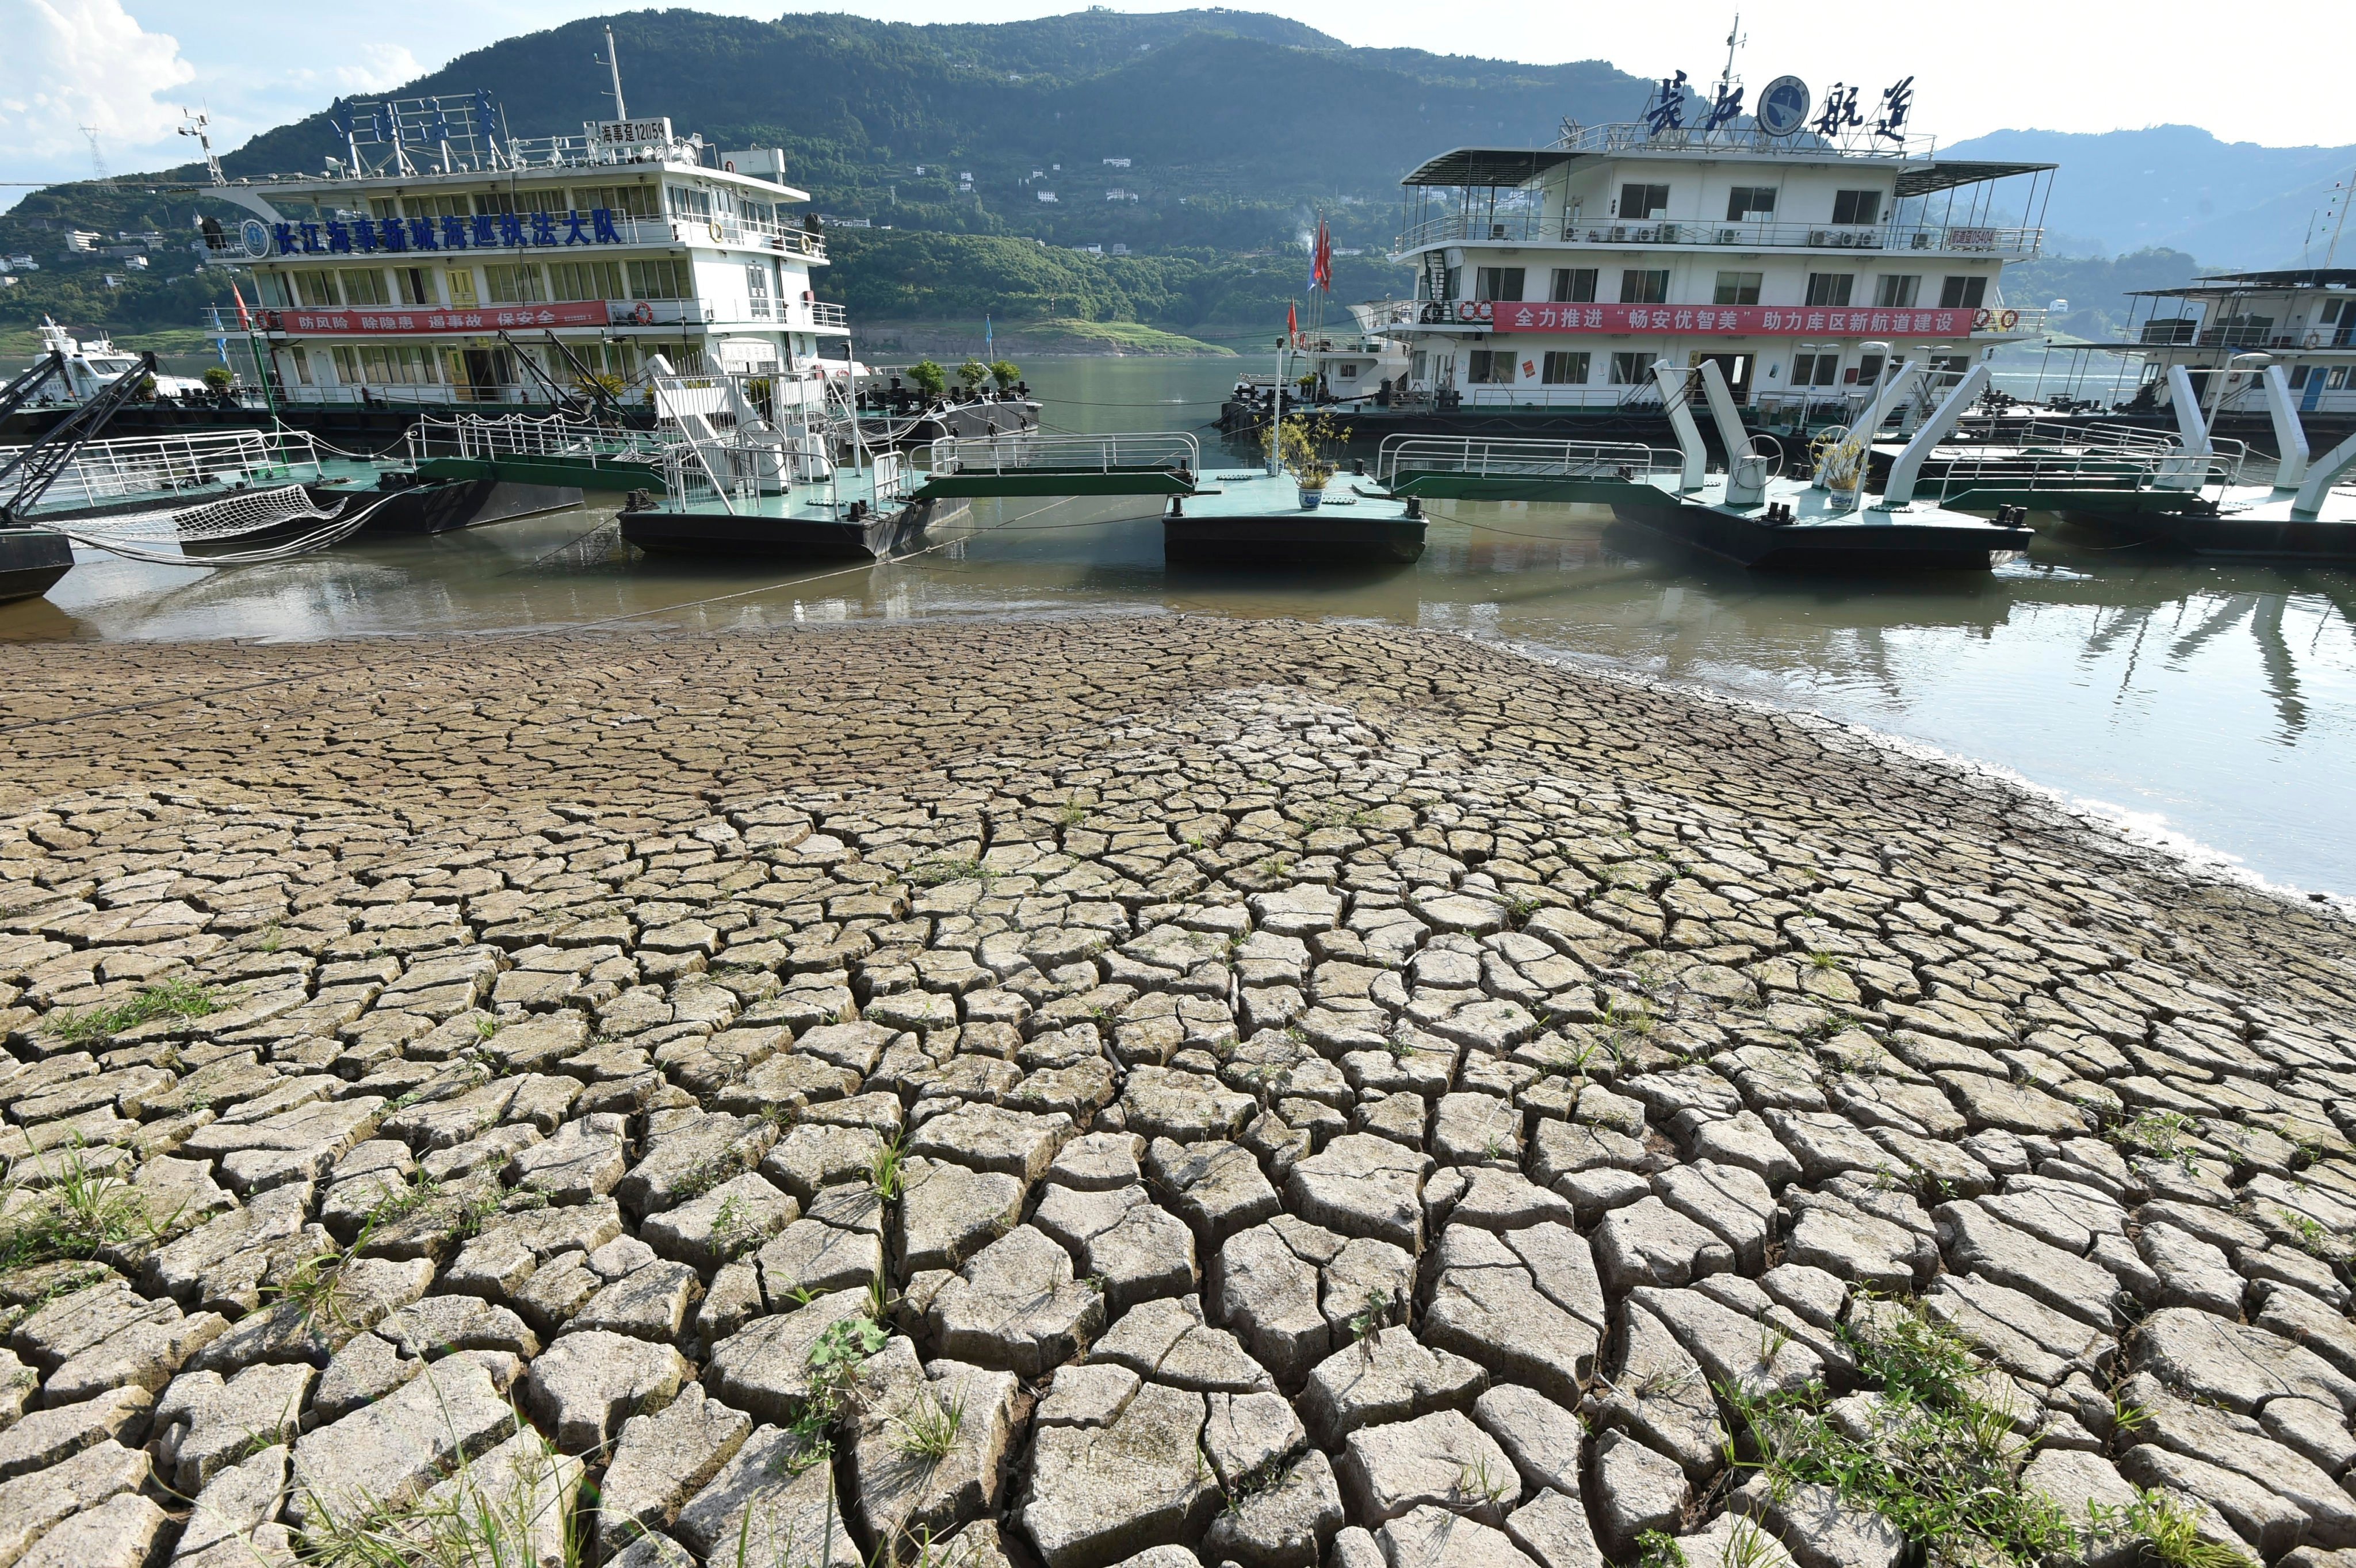 Parts of southern China have been gripped by heatwaves and drought in recent months. Photo: AP